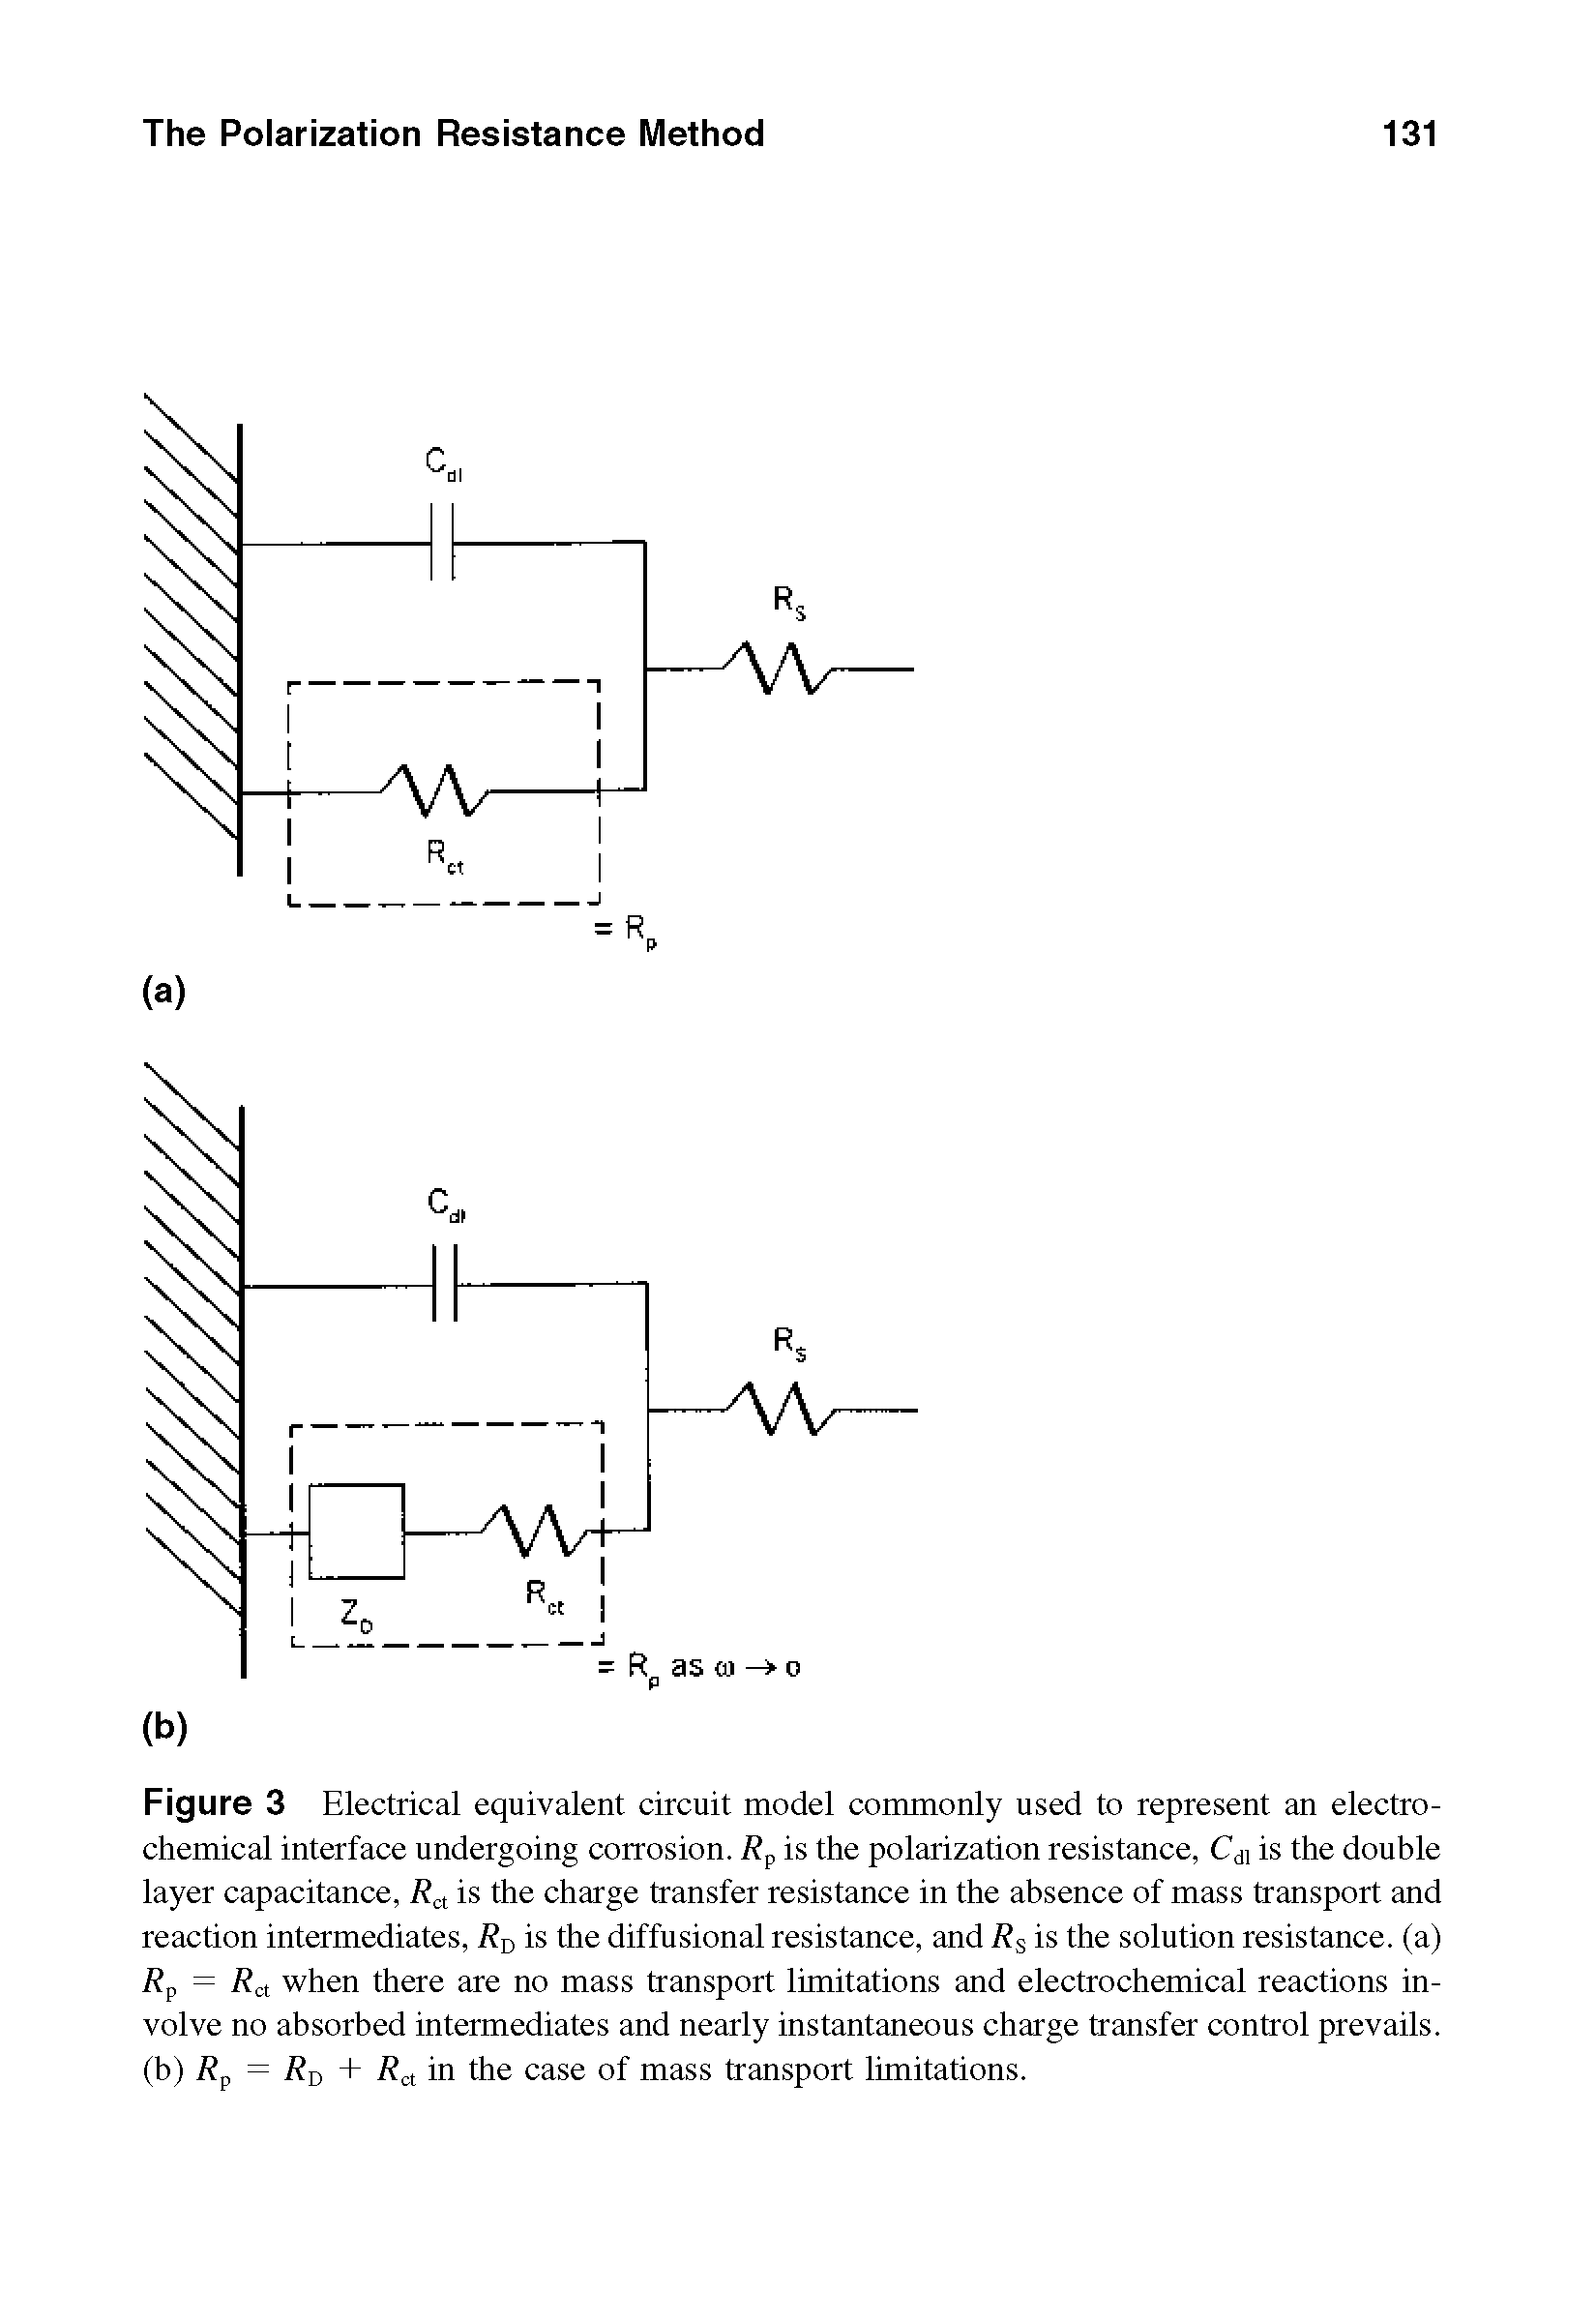 Figure 3 Electrical equivalent circuit model commonly used to represent an electrochemical interface undergoing corrosion. Rp is the polarization resistance, Cd] is the double layer capacitance, Rct is the charge transfer resistance in the absence of mass transport and reaction intermediates, RD is the diffusional resistance, and Rs is the solution resistance, (a) Rp = Rct when there are no mass transport limitations and electrochemical reactions involve no absorbed intermediates and nearly instantaneous charge transfer control prevails, (b) Rp = Rd + Rct in the case of mass transport limitations.